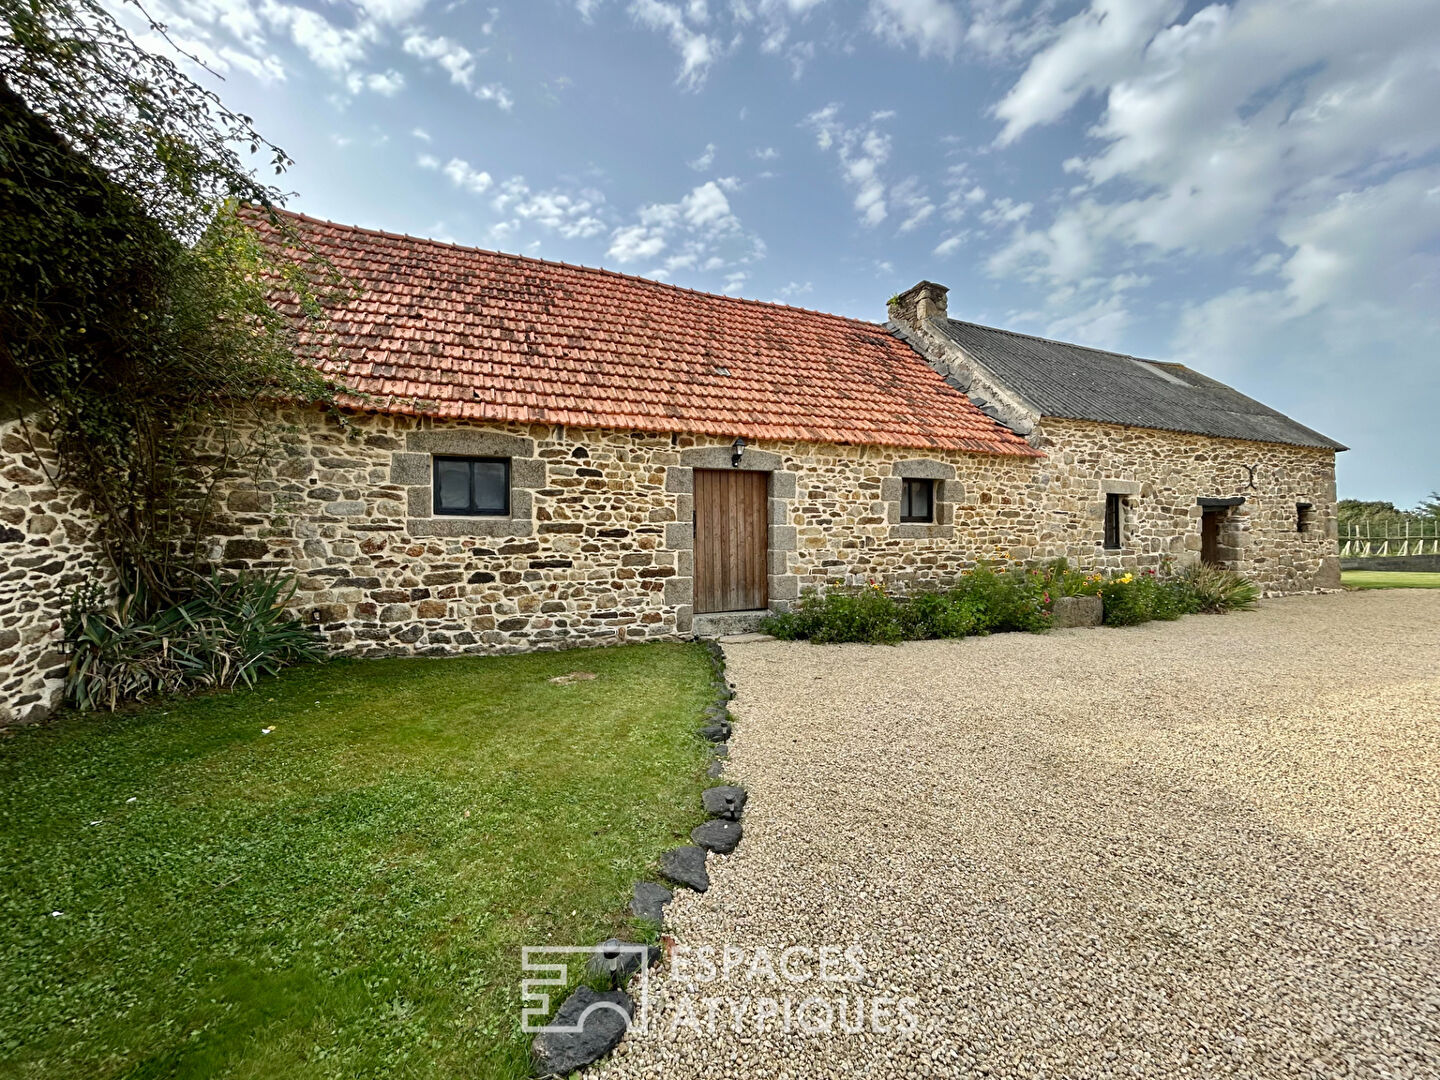 Renovated farmhouse with its stone outbuildings